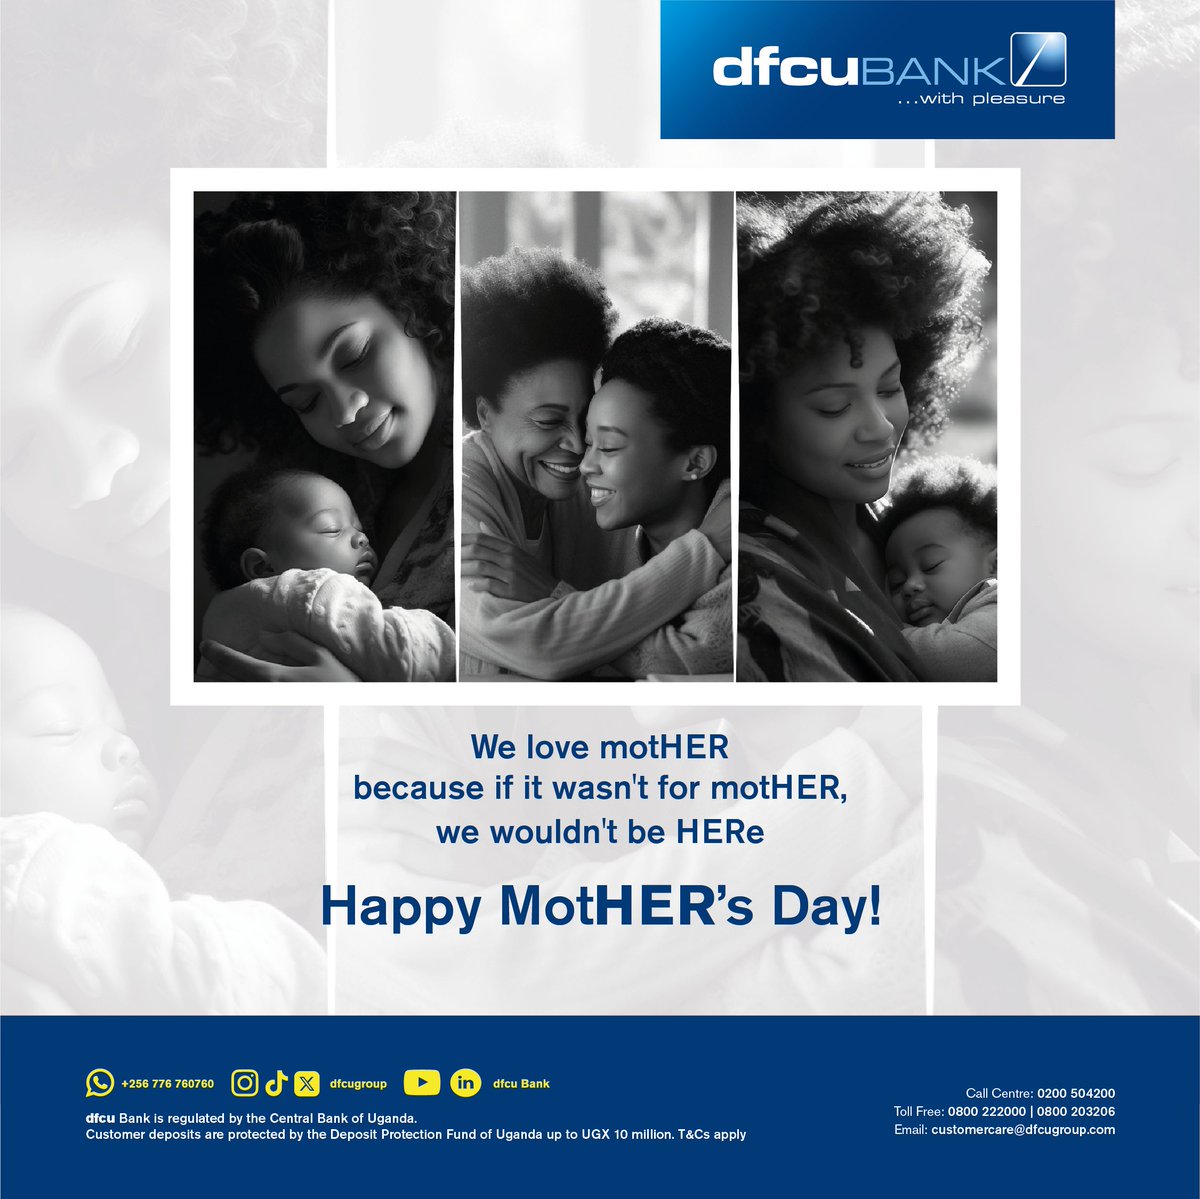 Today, we give a well-deserved standing ovation to our mothers who hold up our skies in countless ways. We celebrate you, thank you and commit to showing up for you as you do for us. Happy Mother’s Day from dfcu Bank! #MothersDay2024